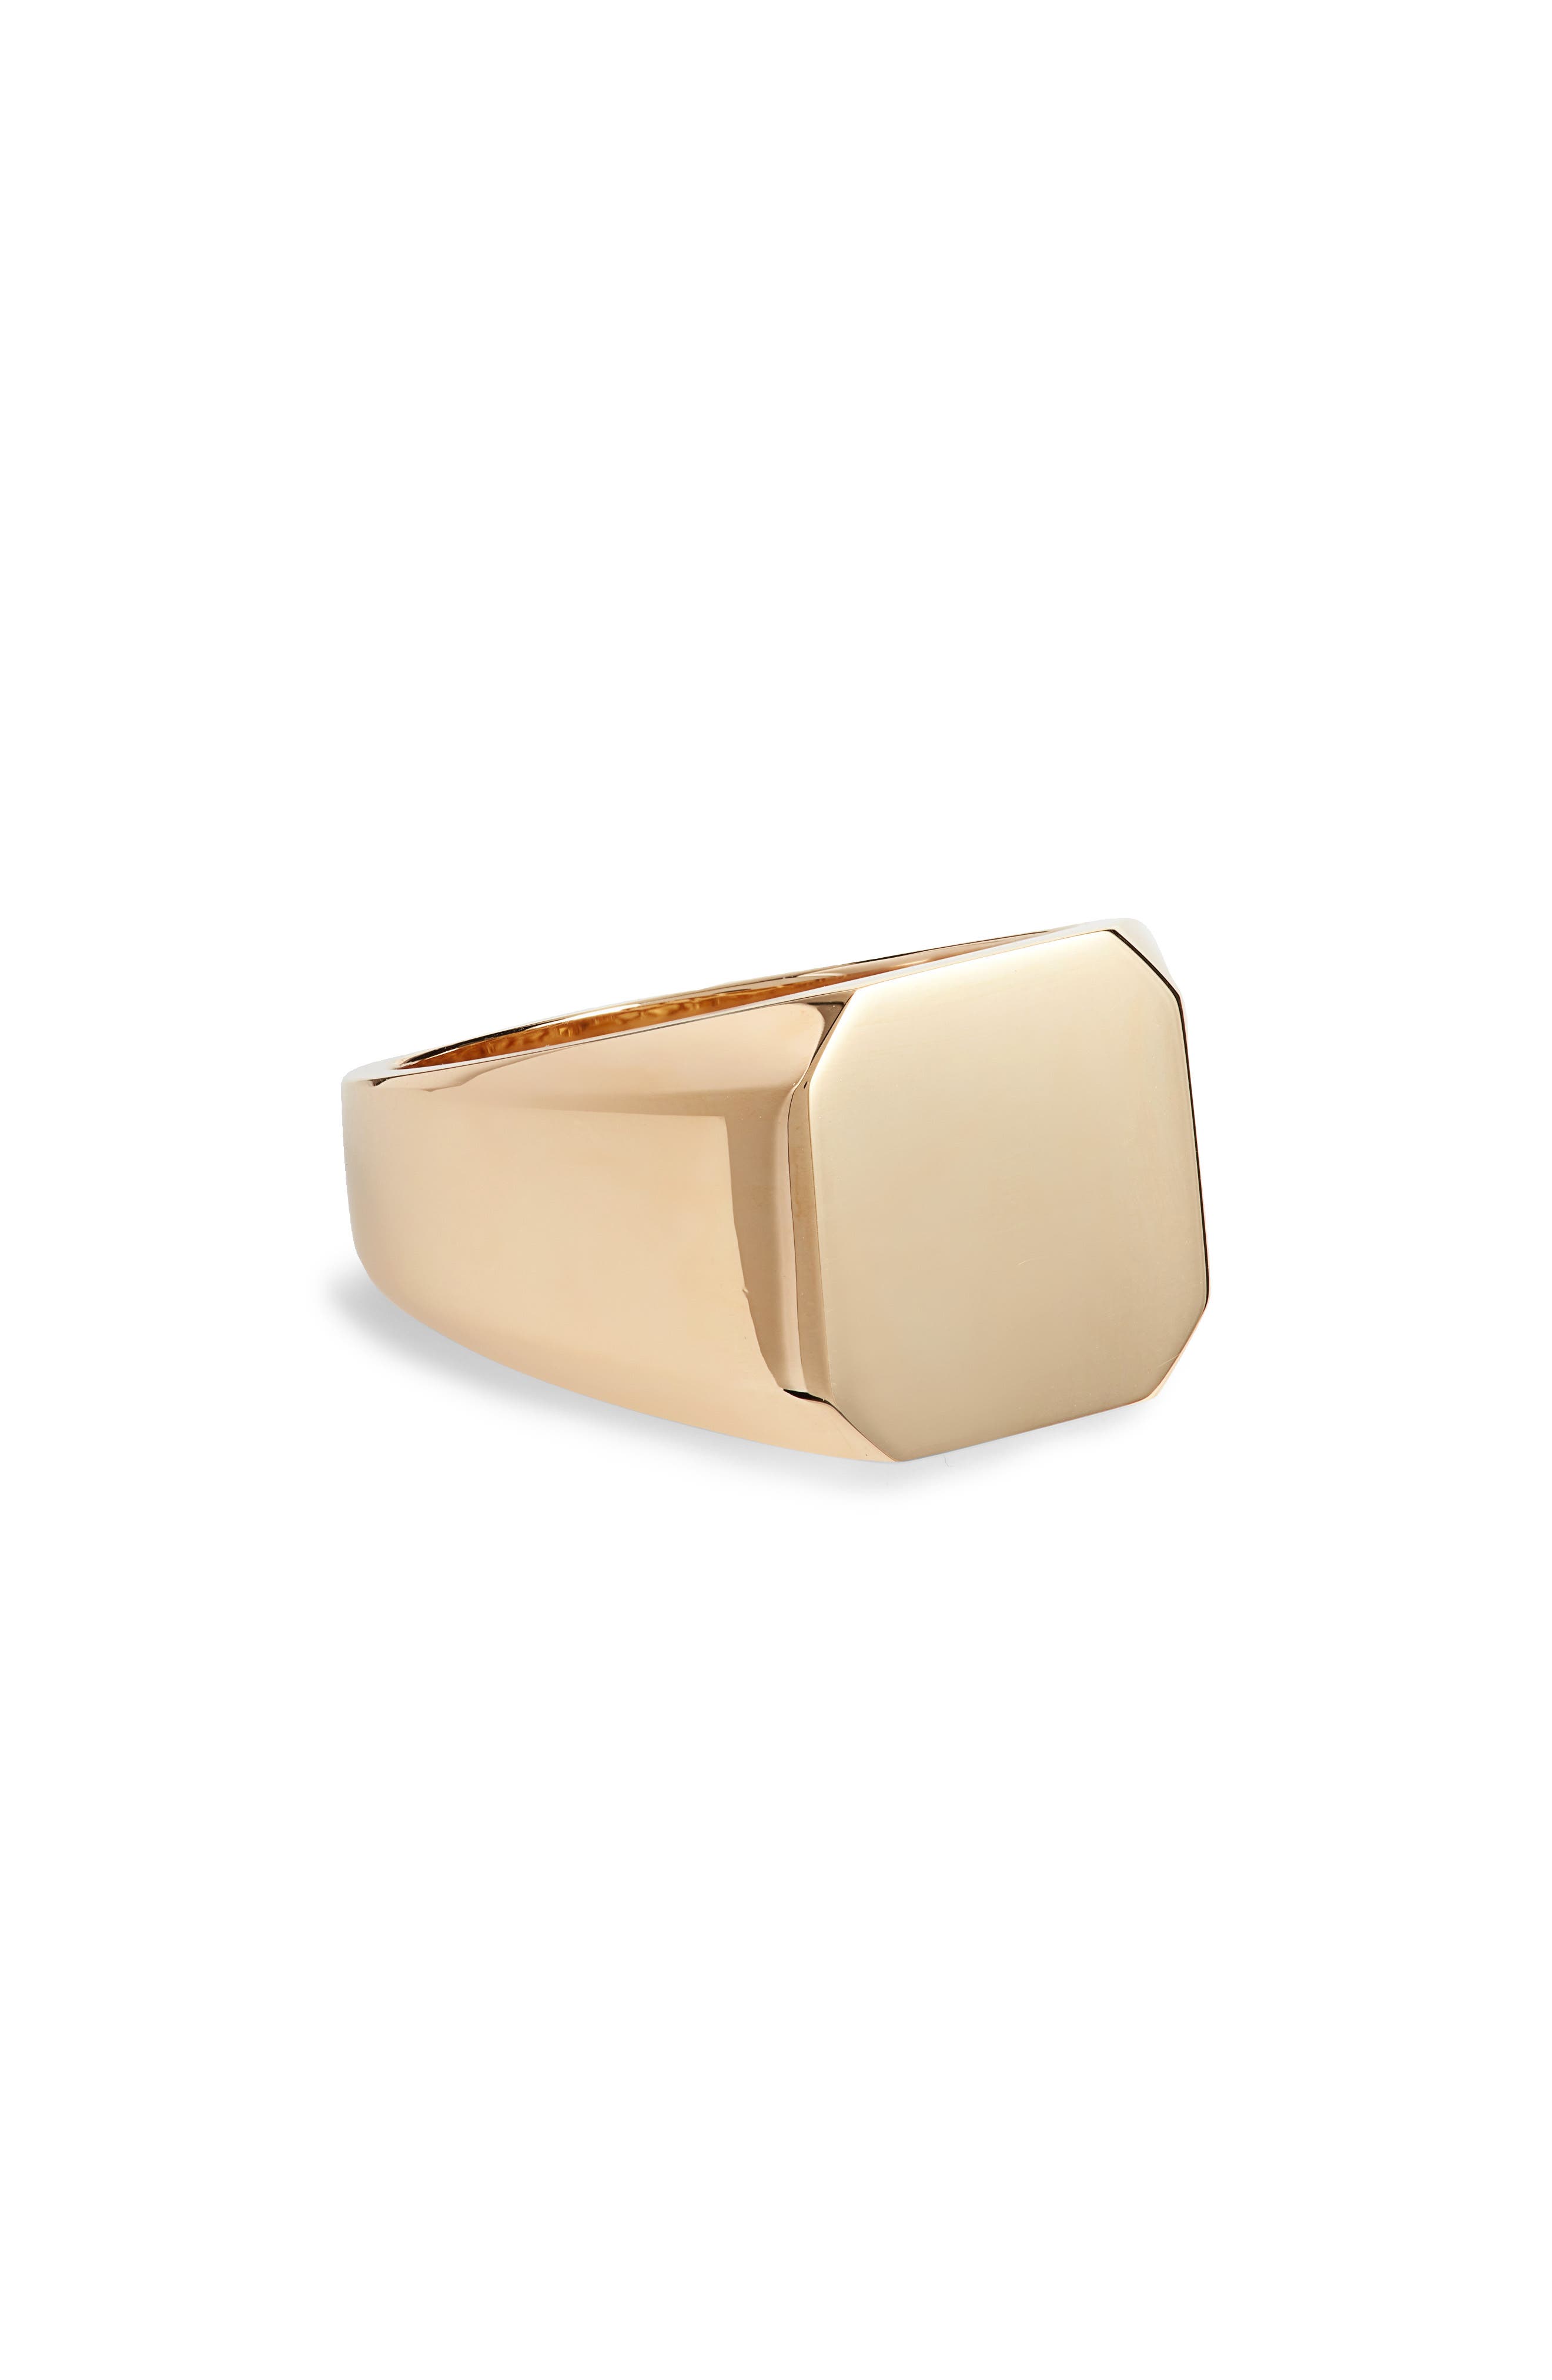 SHAY Men's Hexagonal Signet Ring in Yellow Gold at Nordstrom, Size 9 Us